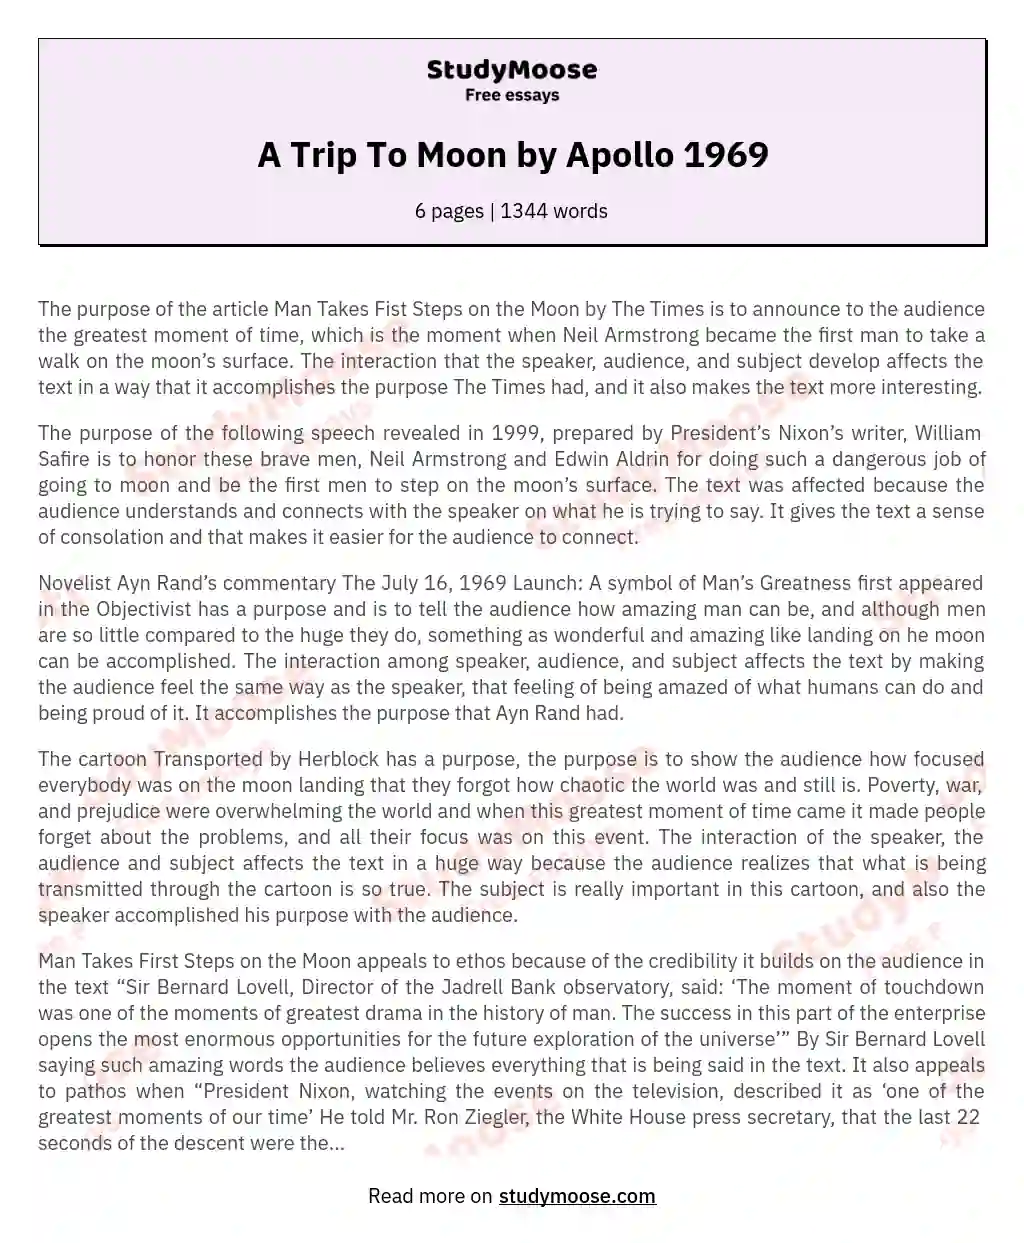 A Trip To Moon by Apollo 1969 essay